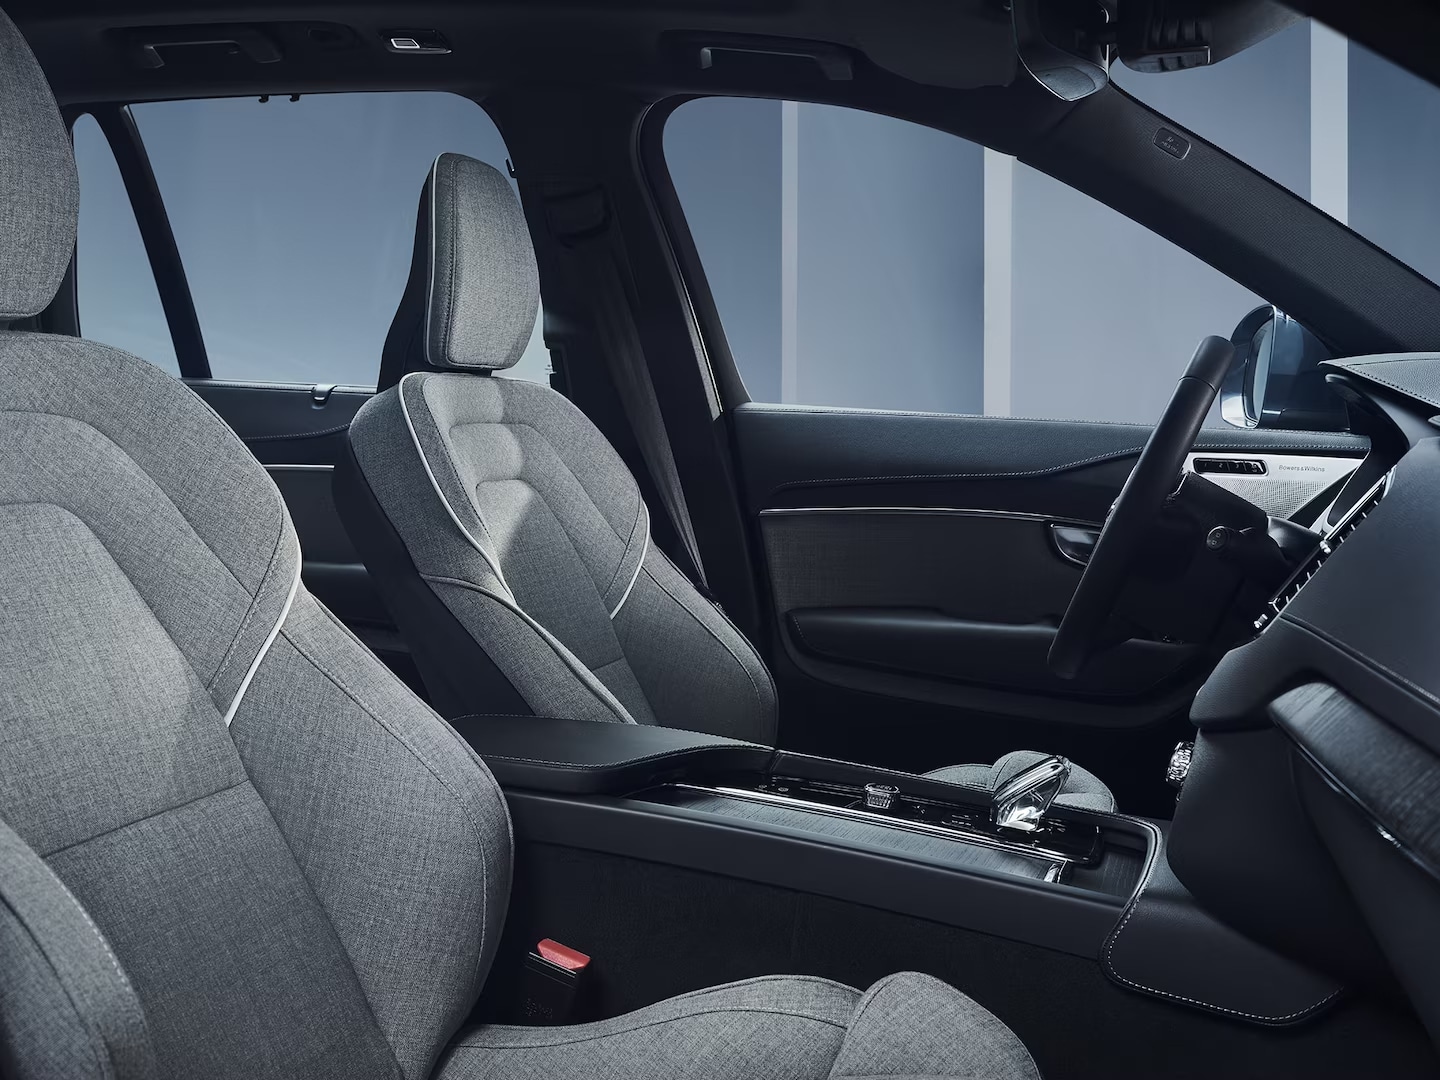 Volvo XC90 plug-in hybrid dashboard, centre console and wool upholstered front seats.